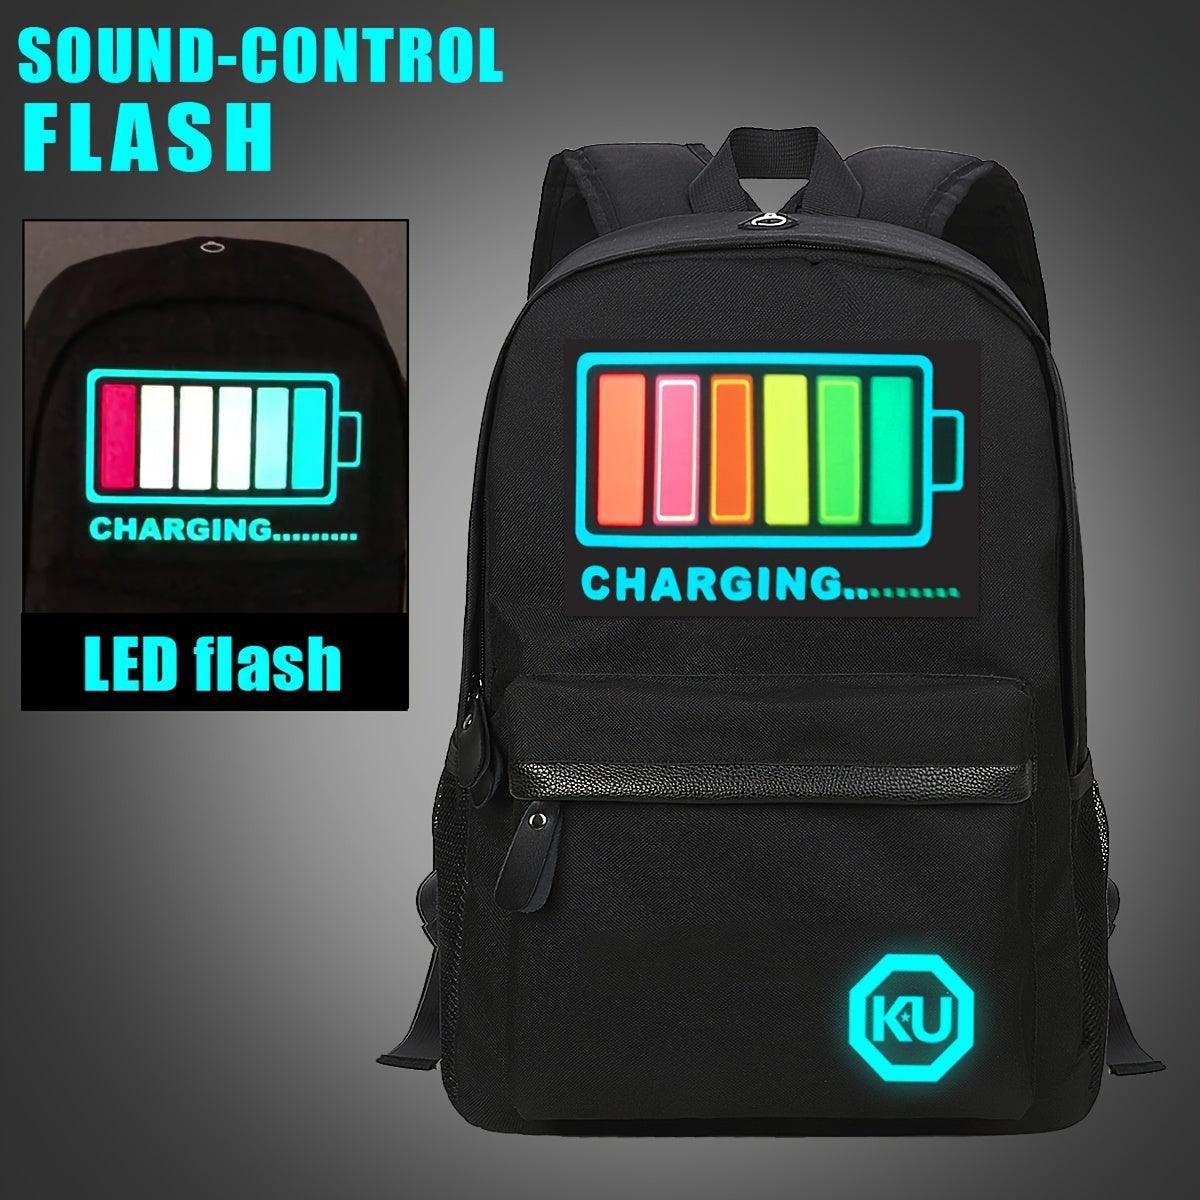 voice-controlled-led-daypack-waterproof-tsa-compliant-secure-spacious-backpack-for-school-and-travel